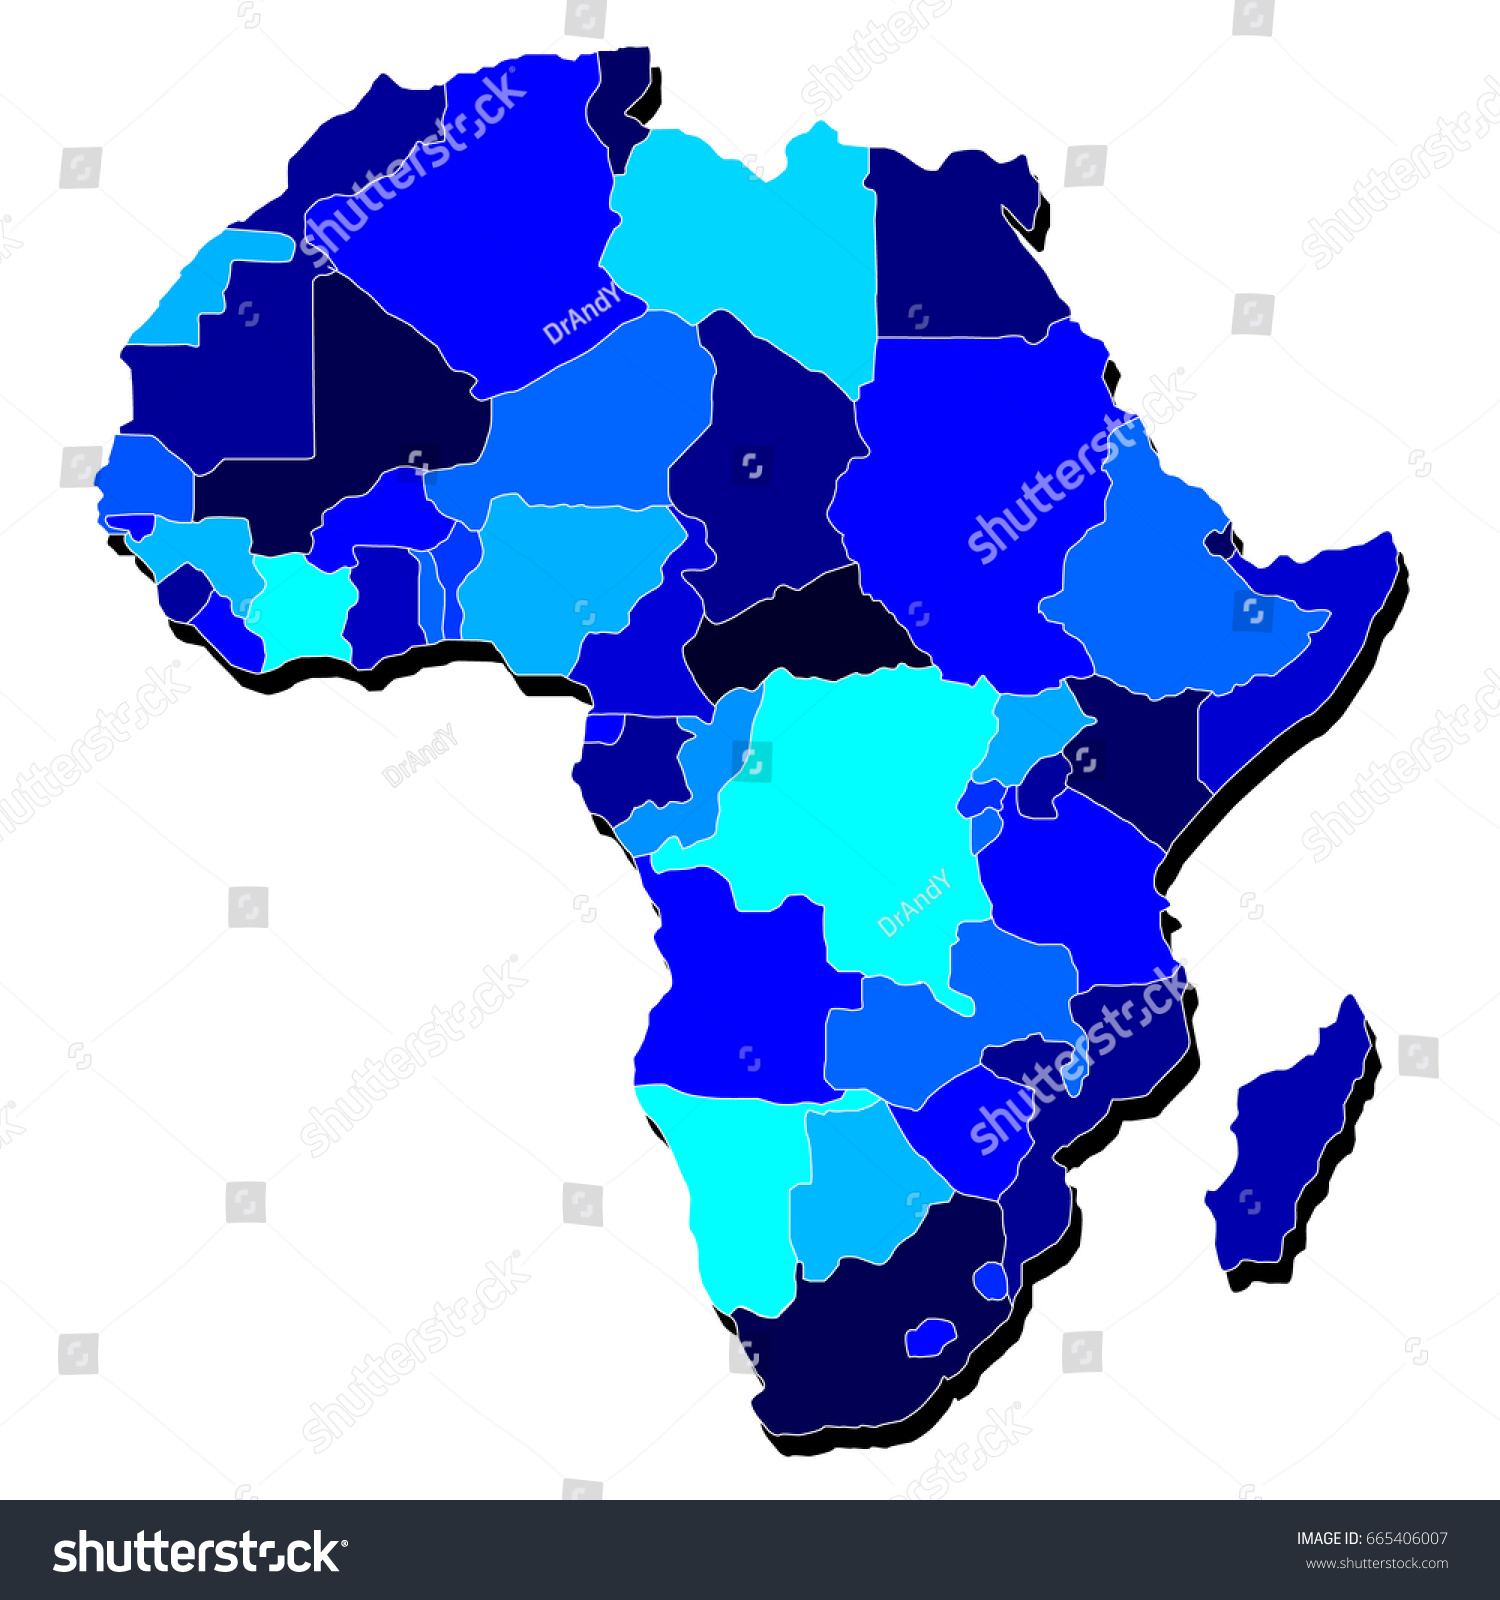 Detailed Digital Africa Map Shades Blue Stock Vector Royalty Free 665406007 Shutterstock 0536